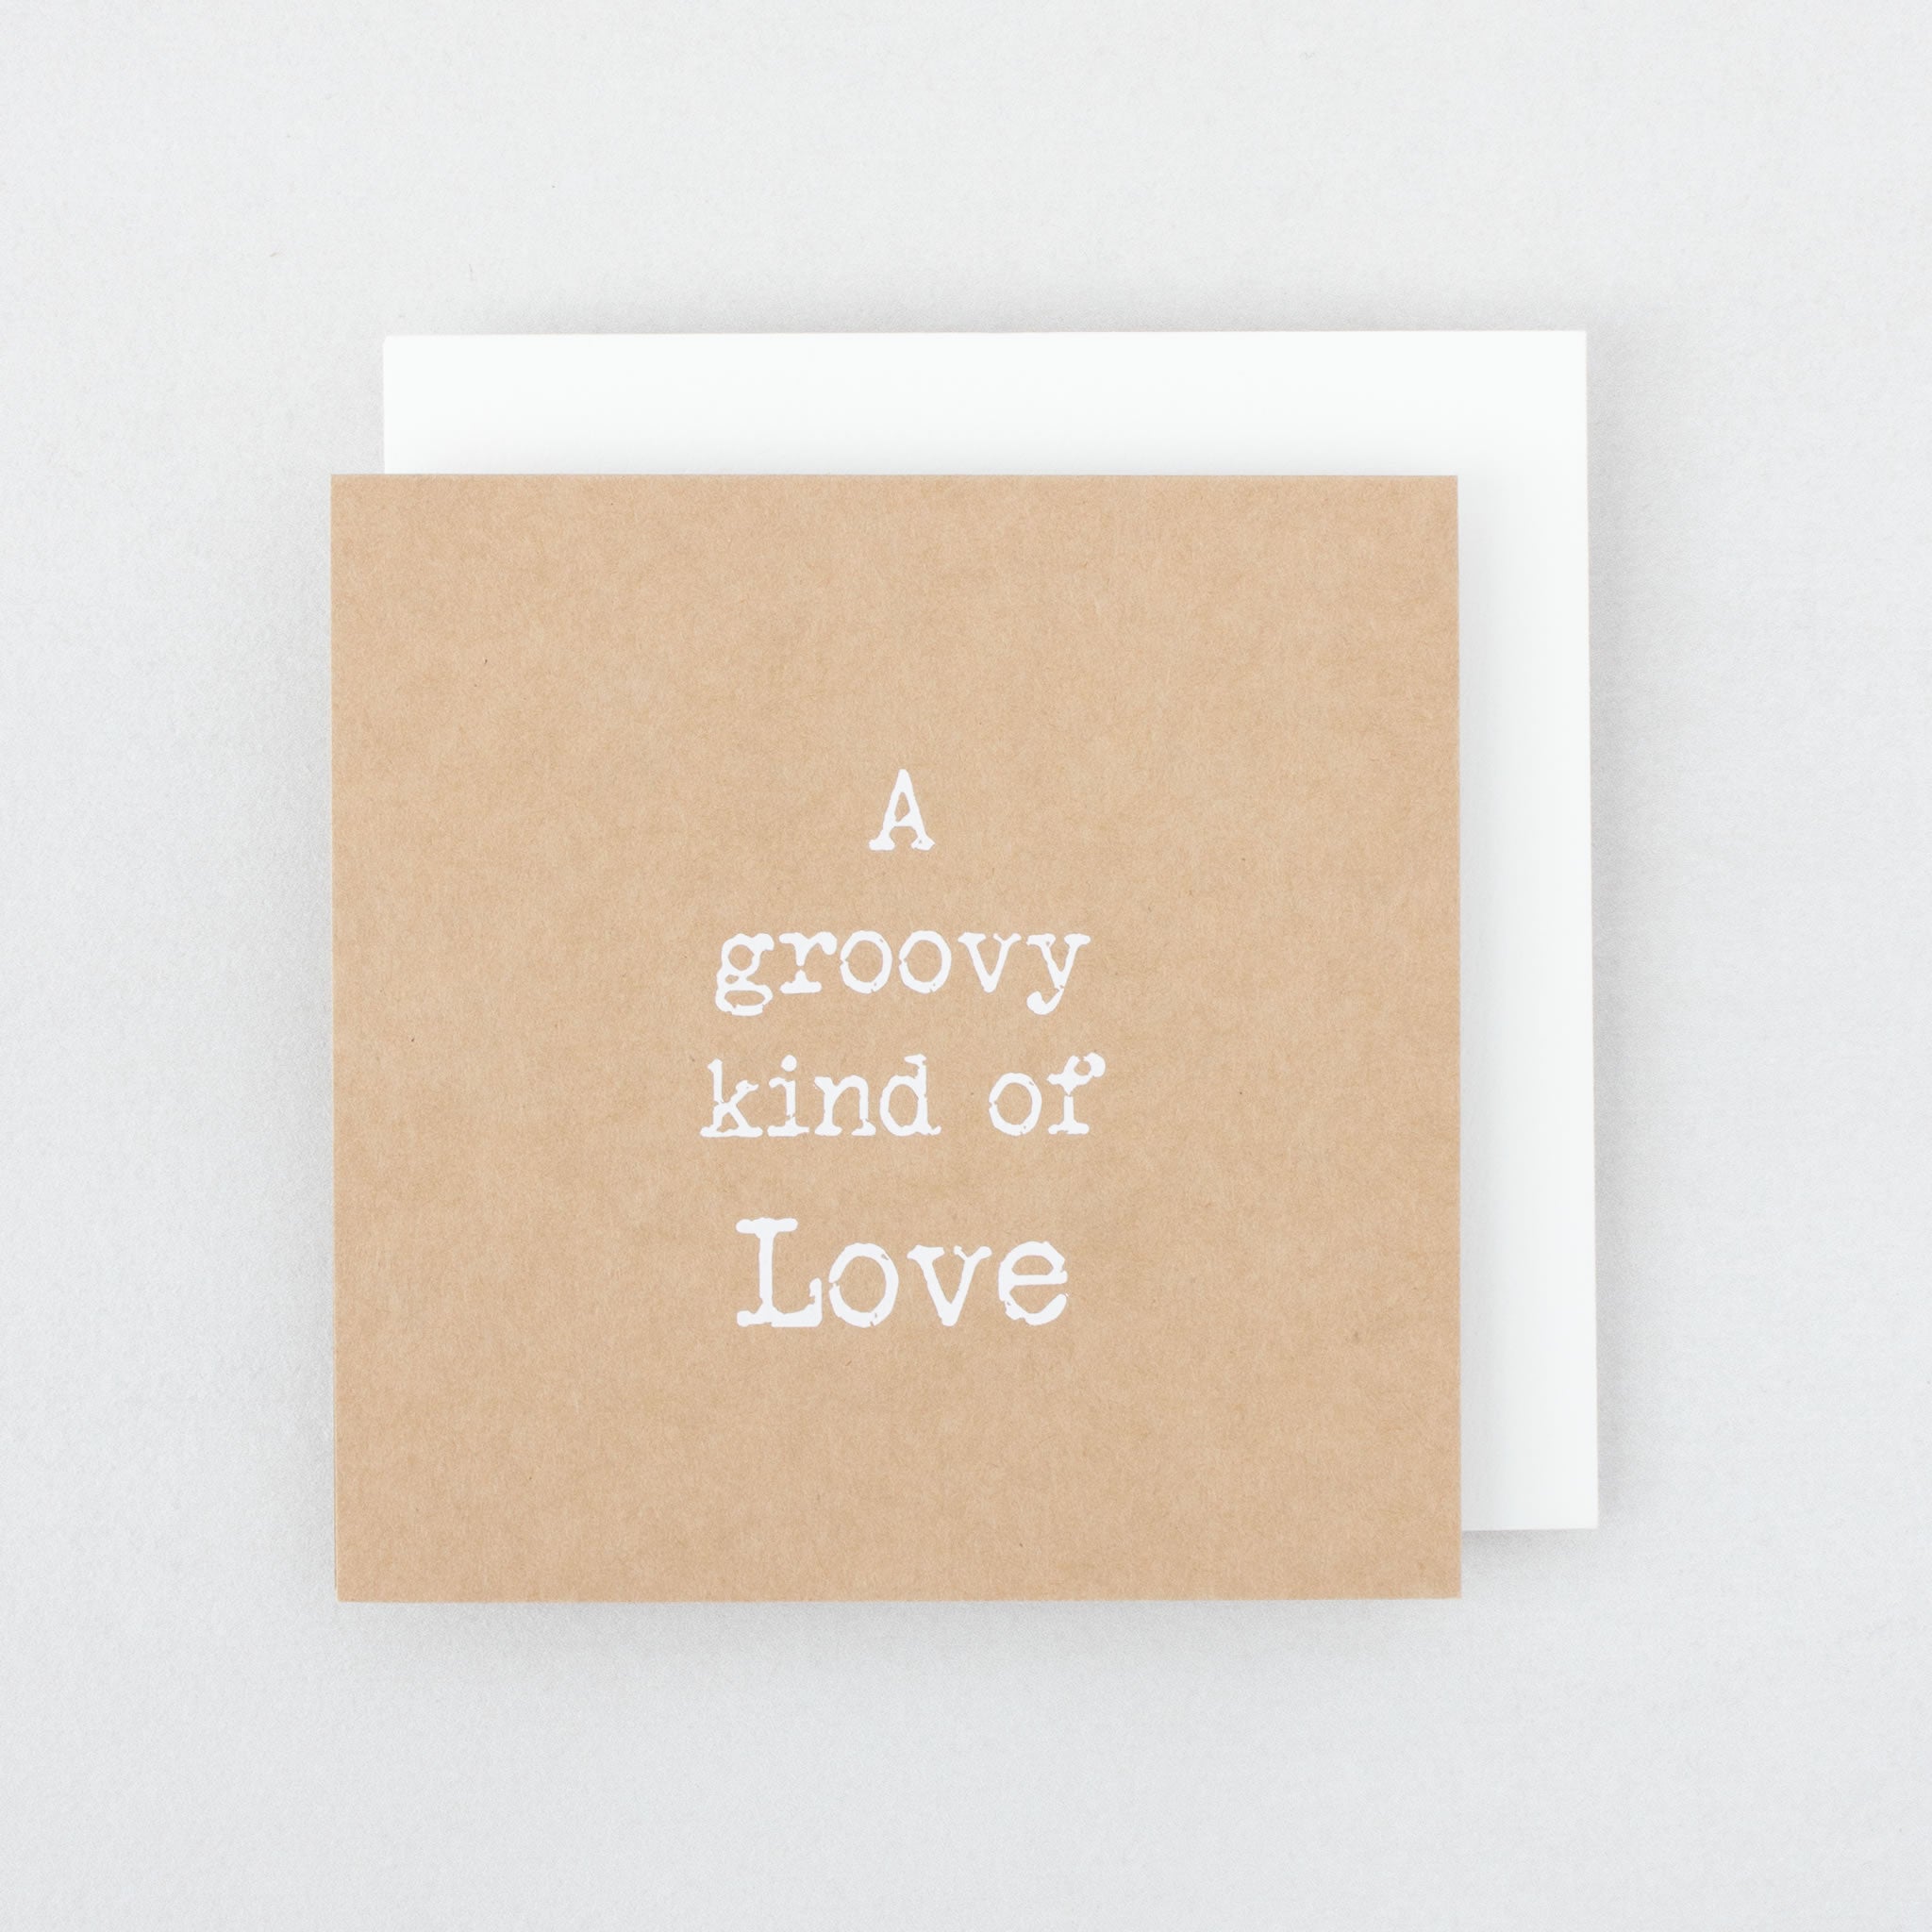 A groovy kind of love